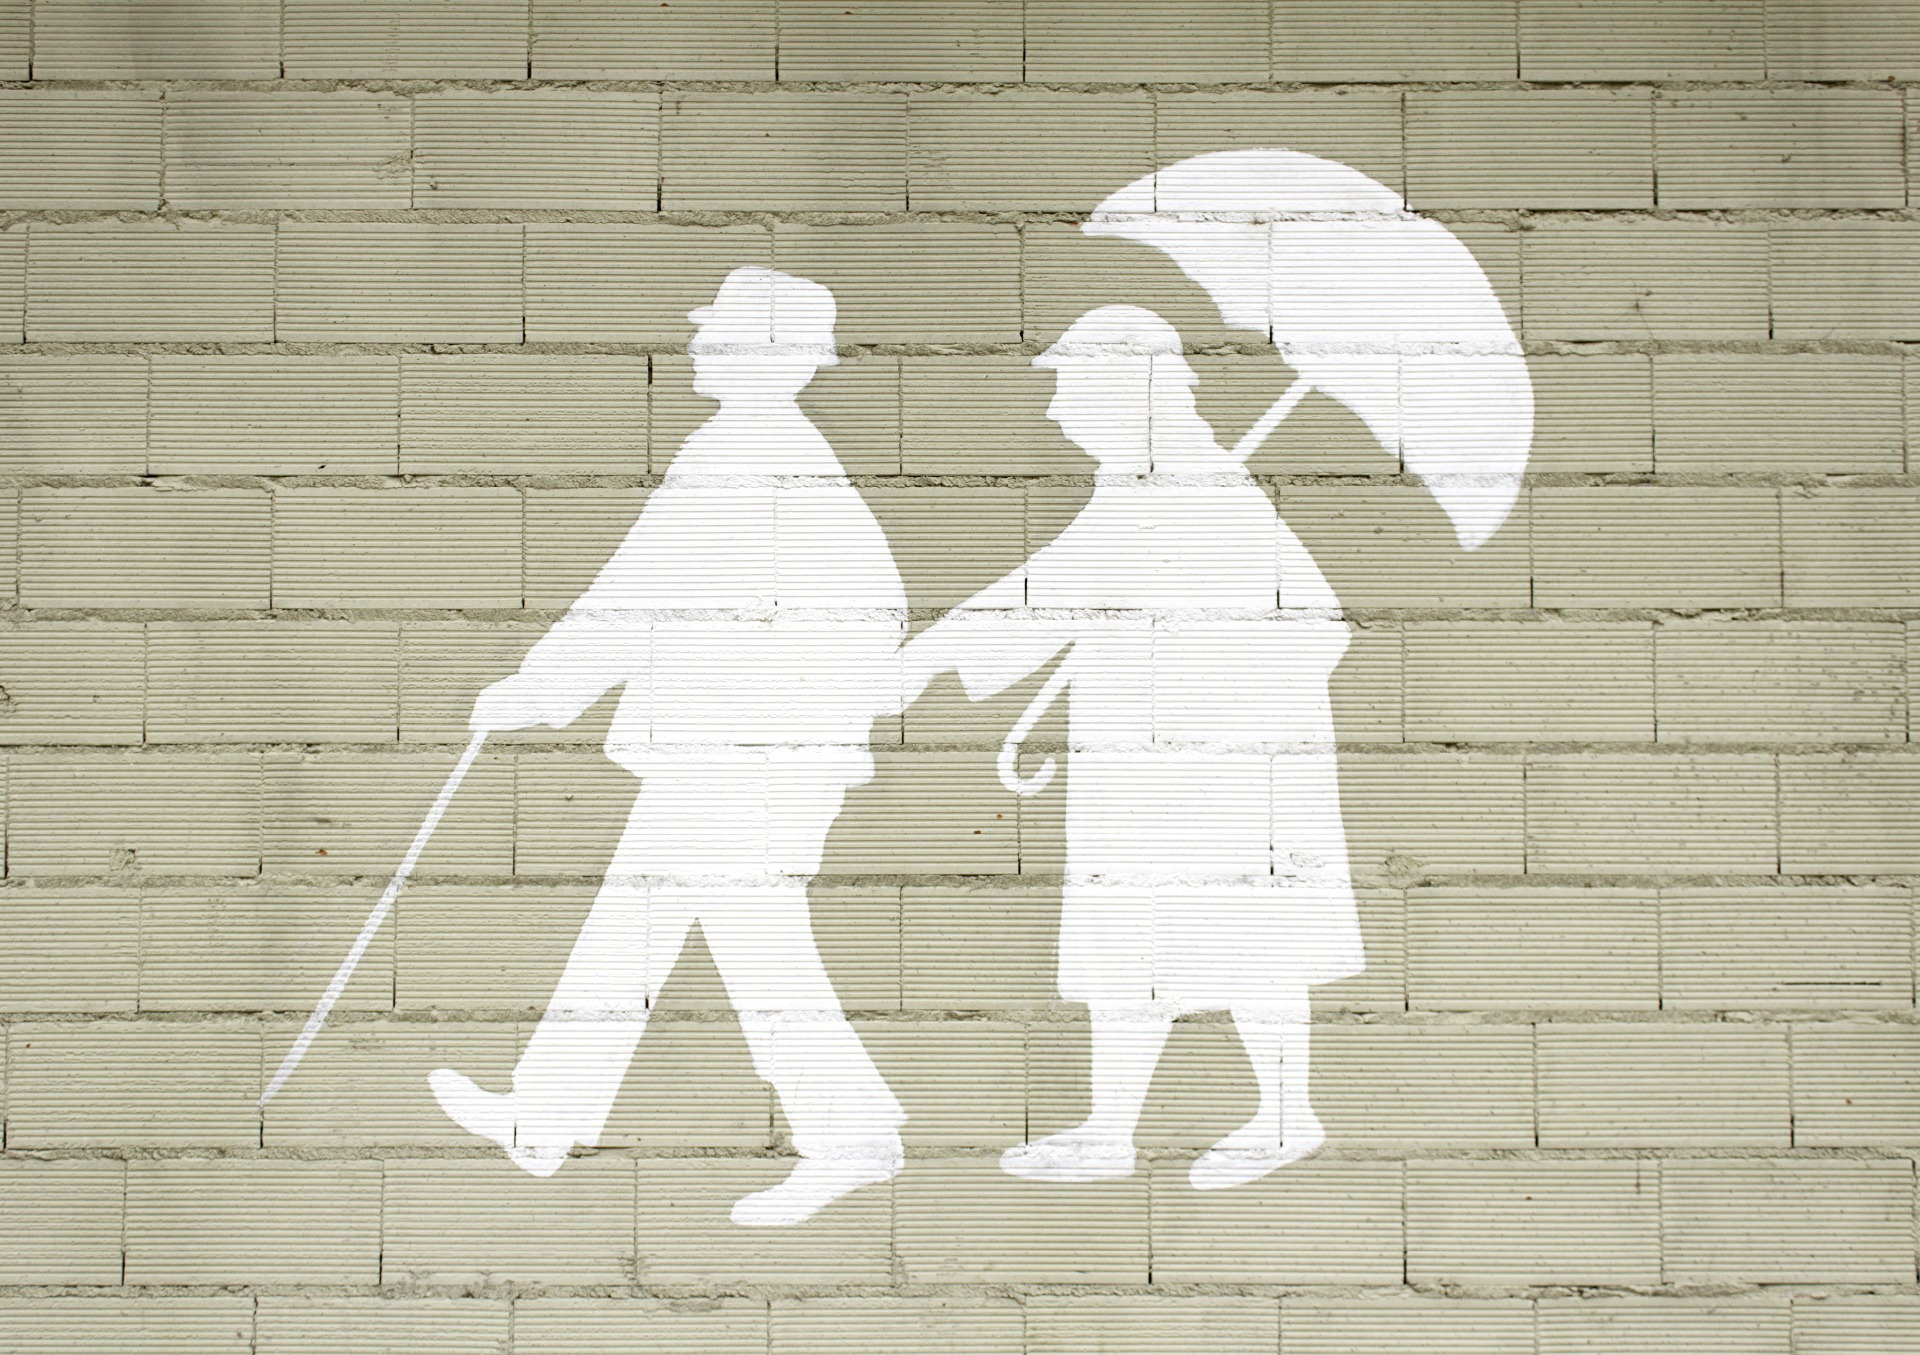 An outline of an elderly couple walking along, painted on a wall